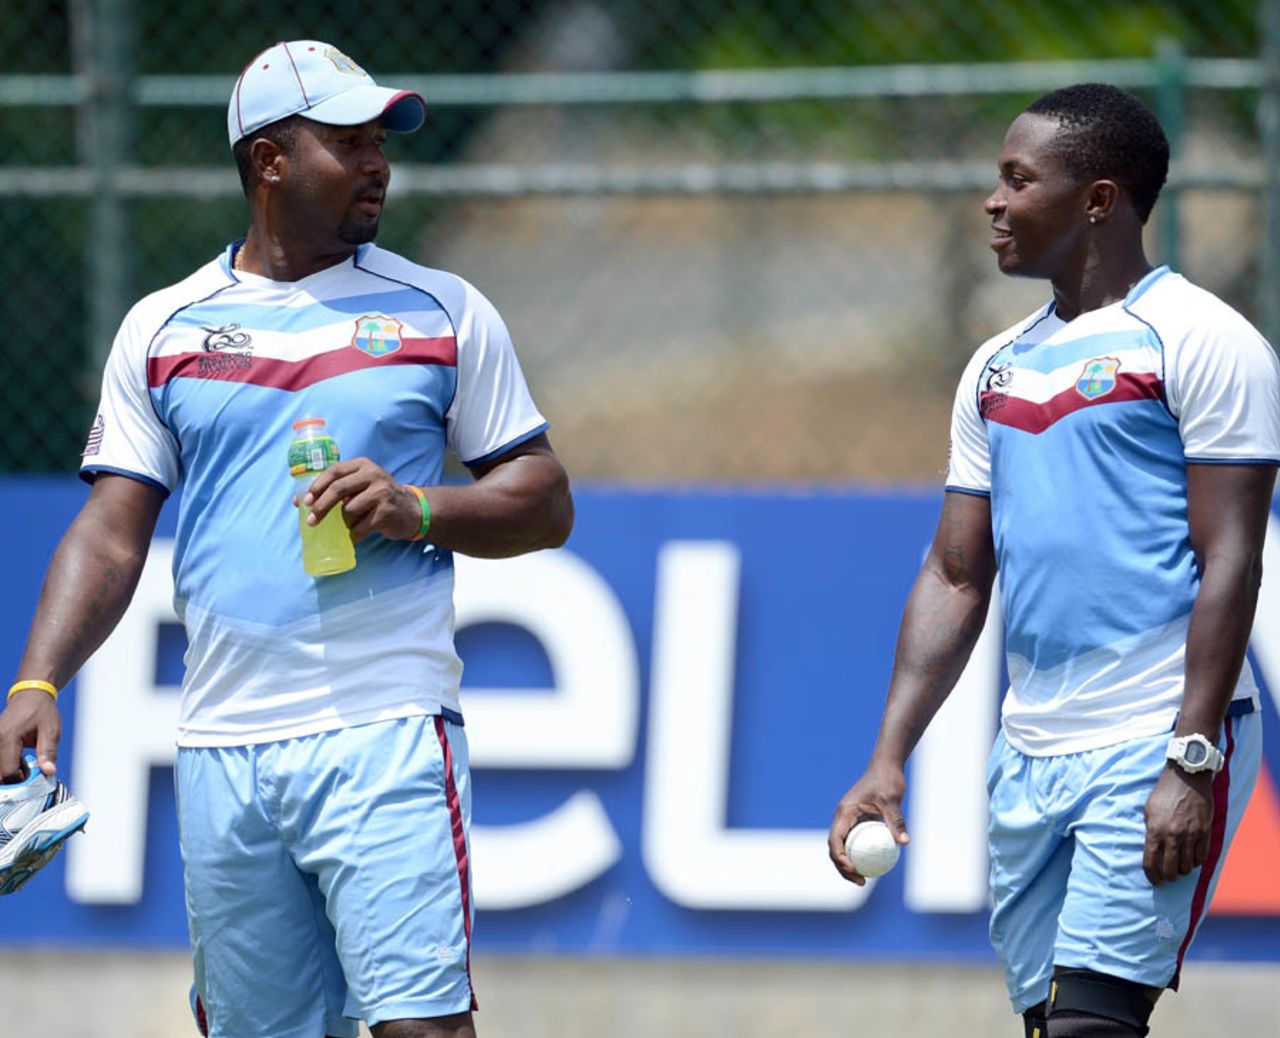 Dwayne Smith and Fidel Edwards chat during a training session, Pallekele, September 26, 2012